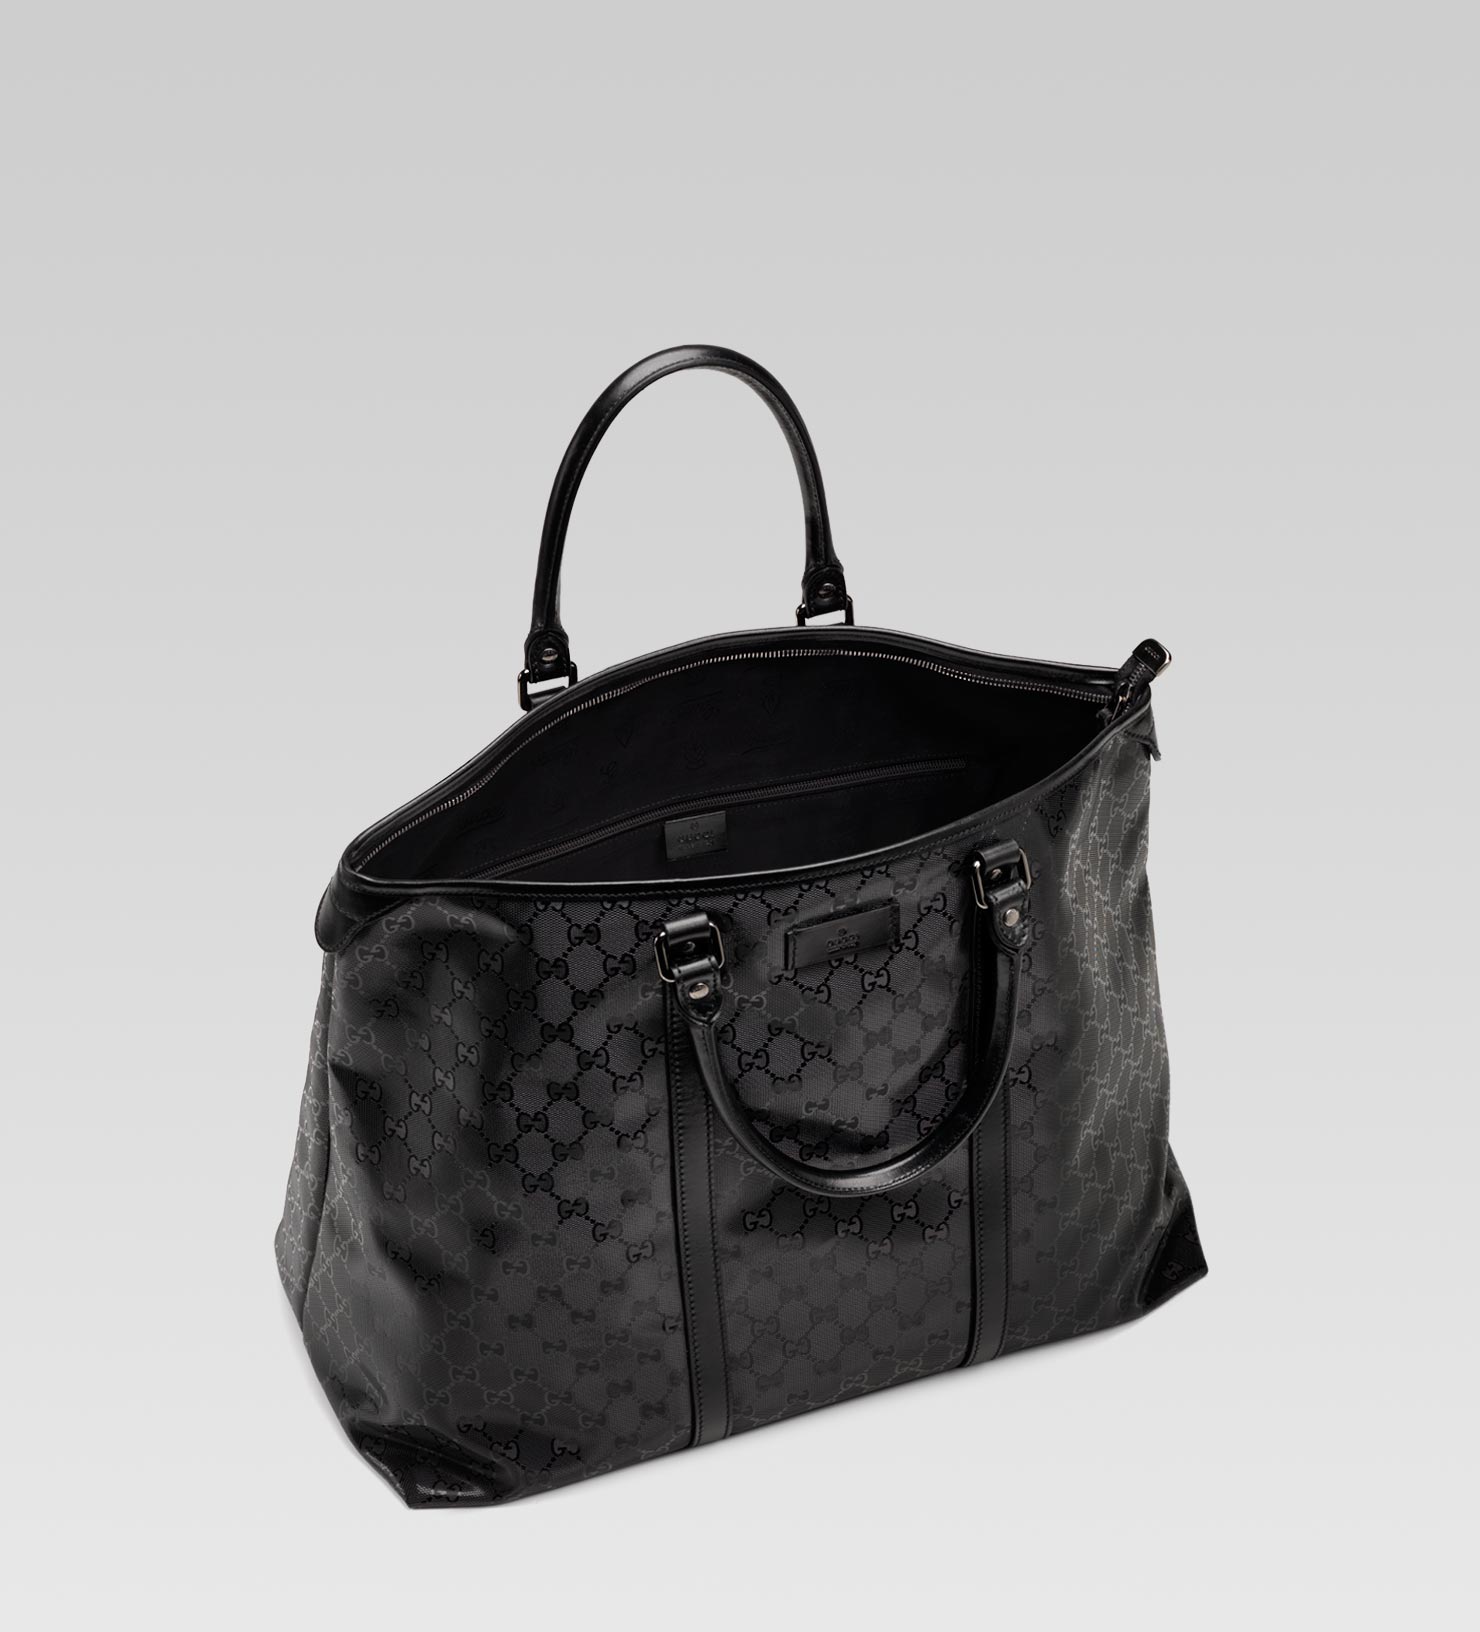 Lyst - Gucci Tote Bag in Black for Men